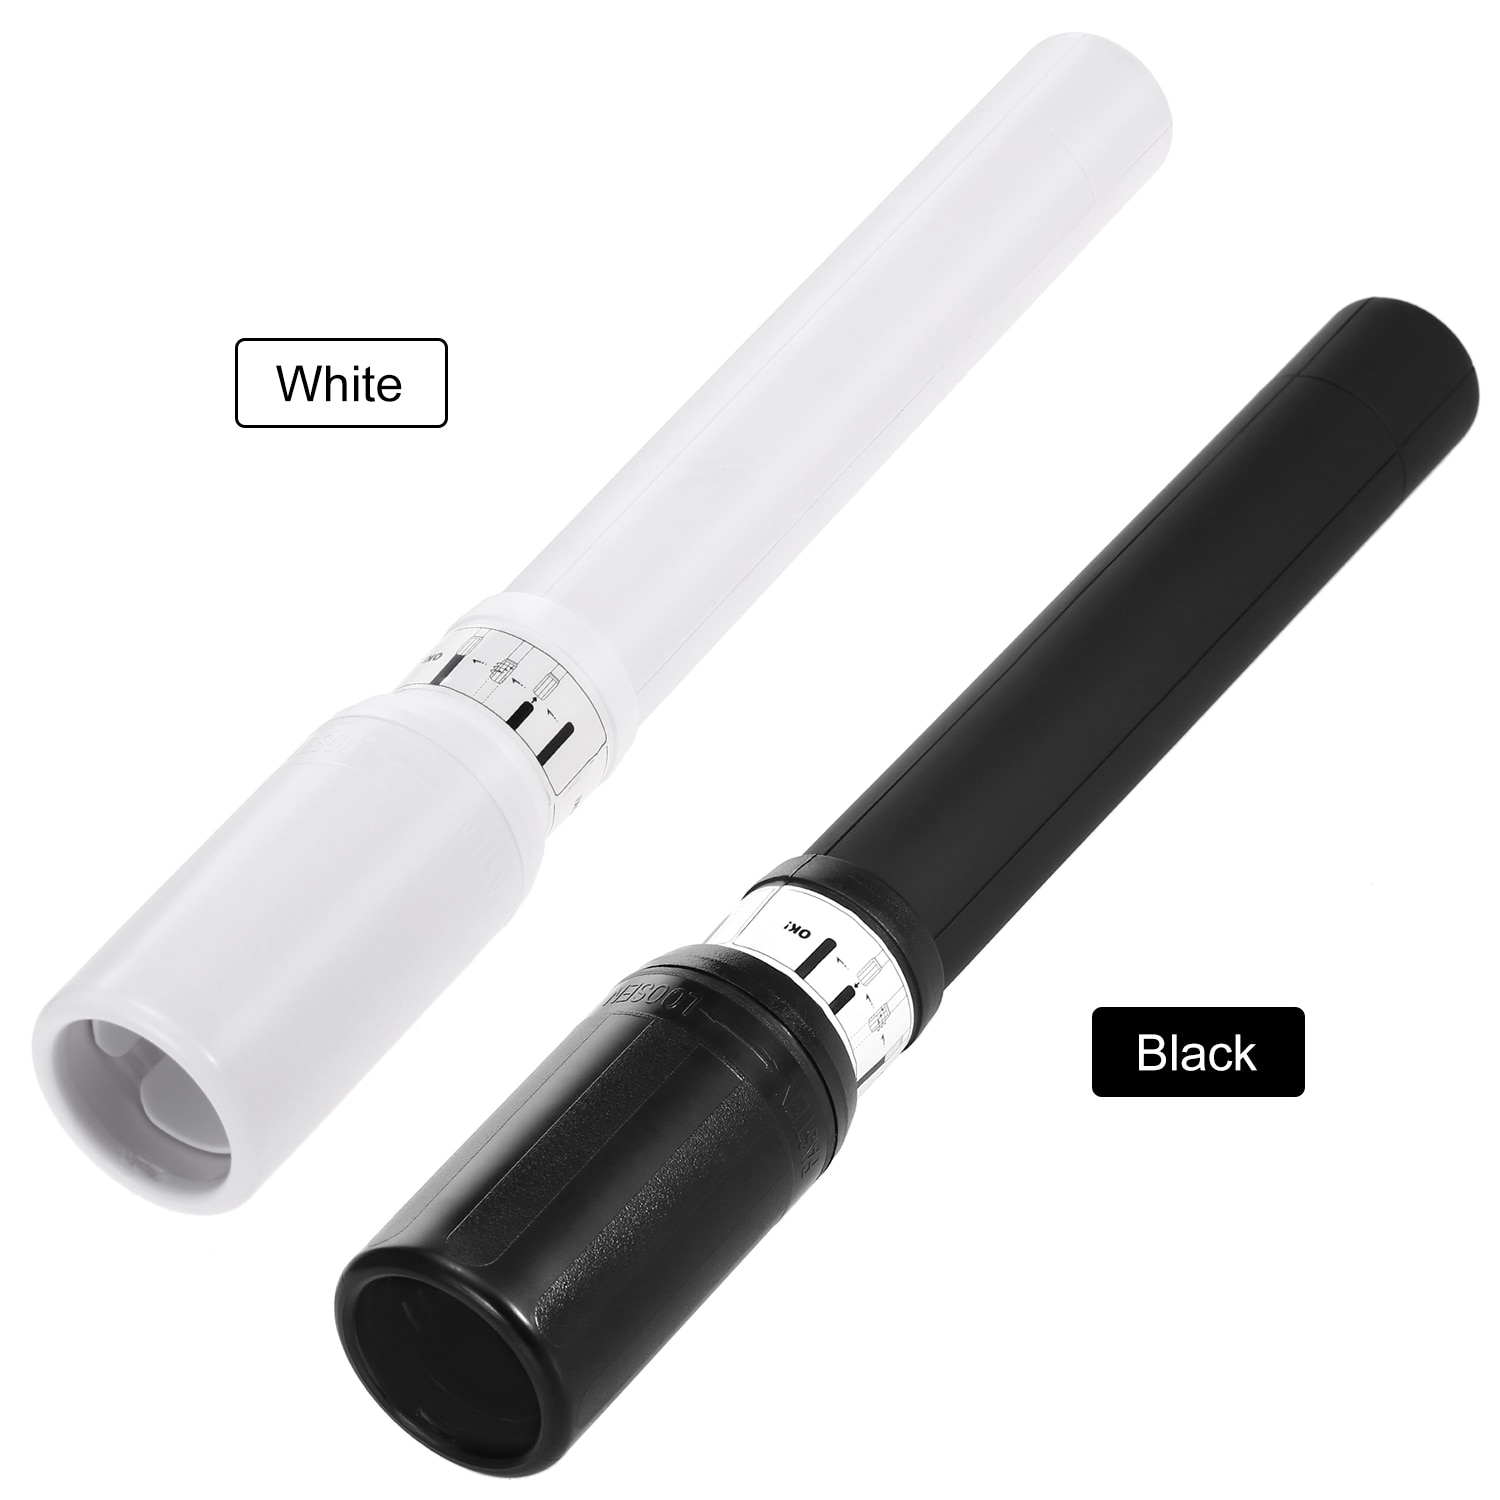 Black White Pool Cue Extension Extender Indoor Entertainment Telescopic Cue Extension for Billiard Pool Cues